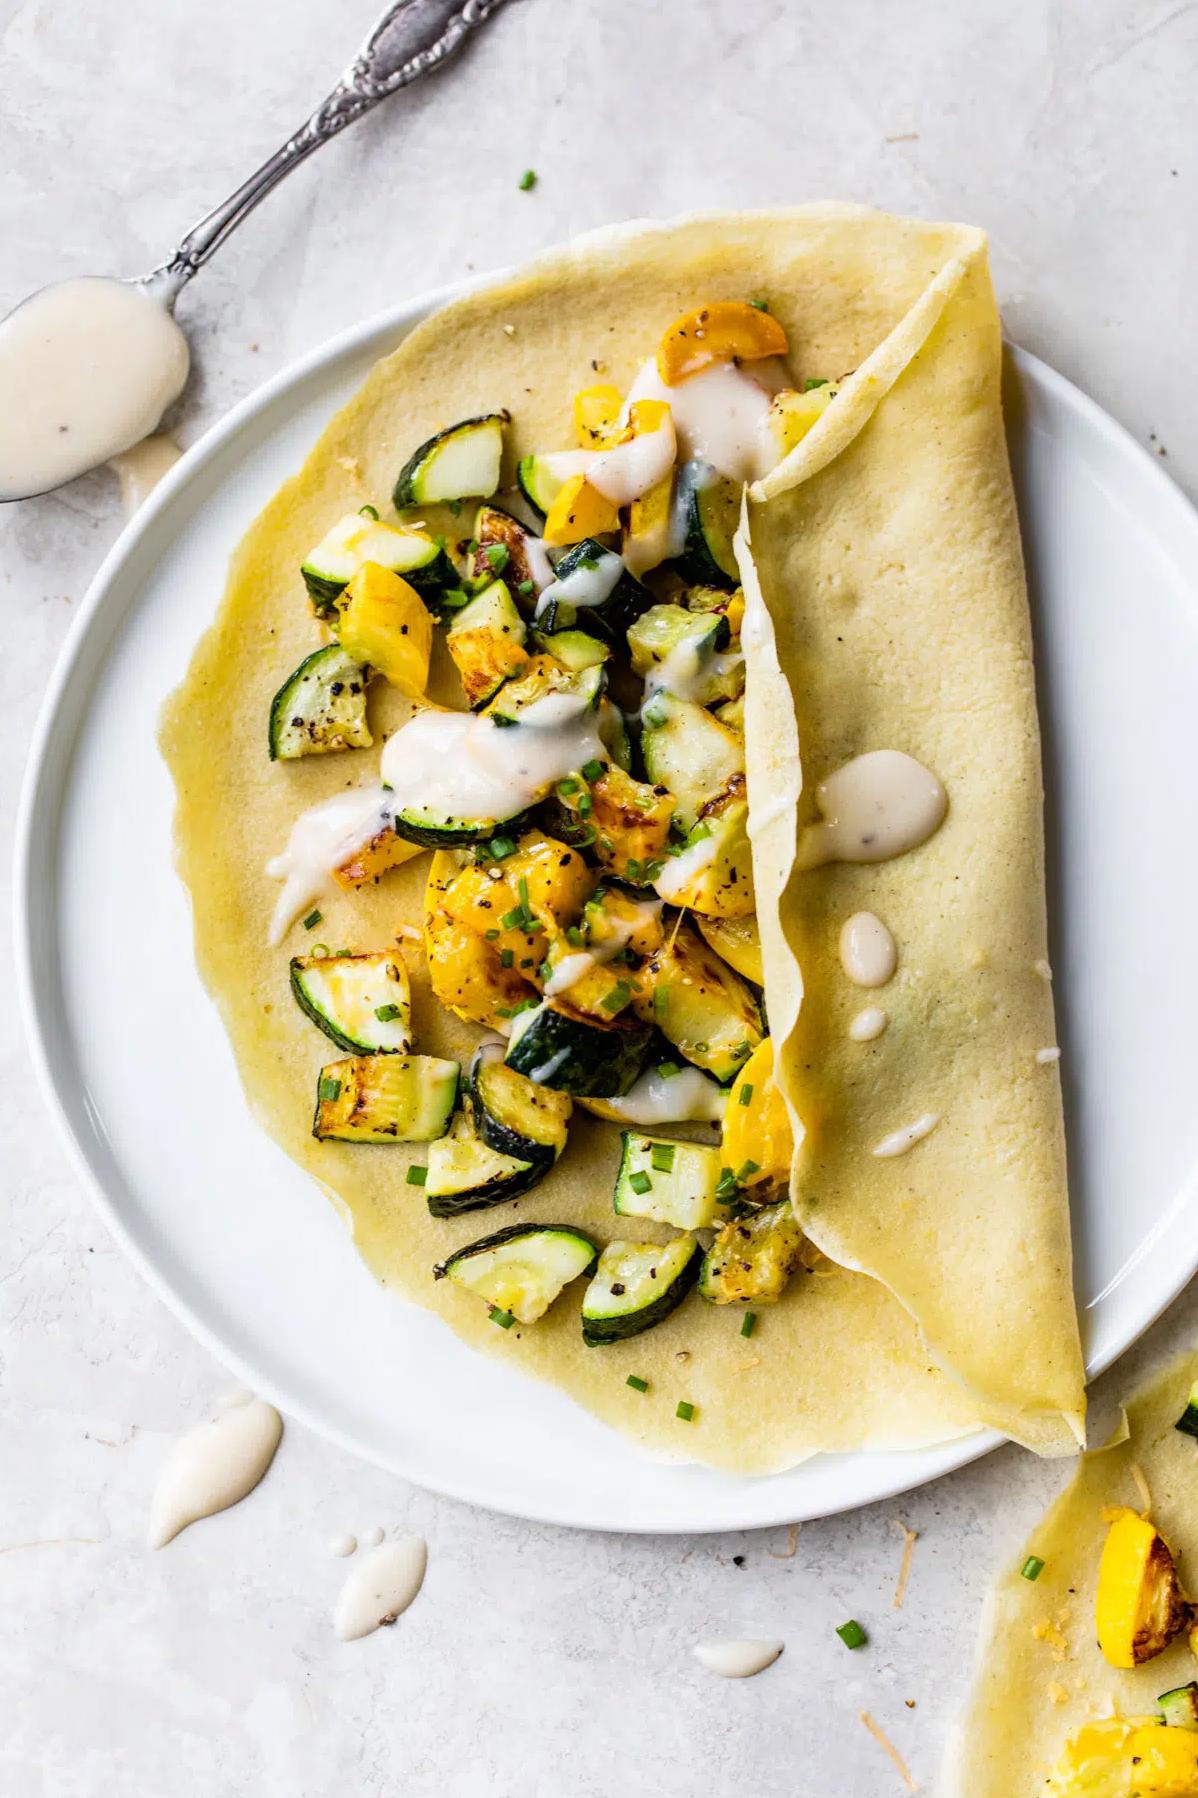 Savory Coffee Crepes With Zucchini, Tomatoes and Cheese